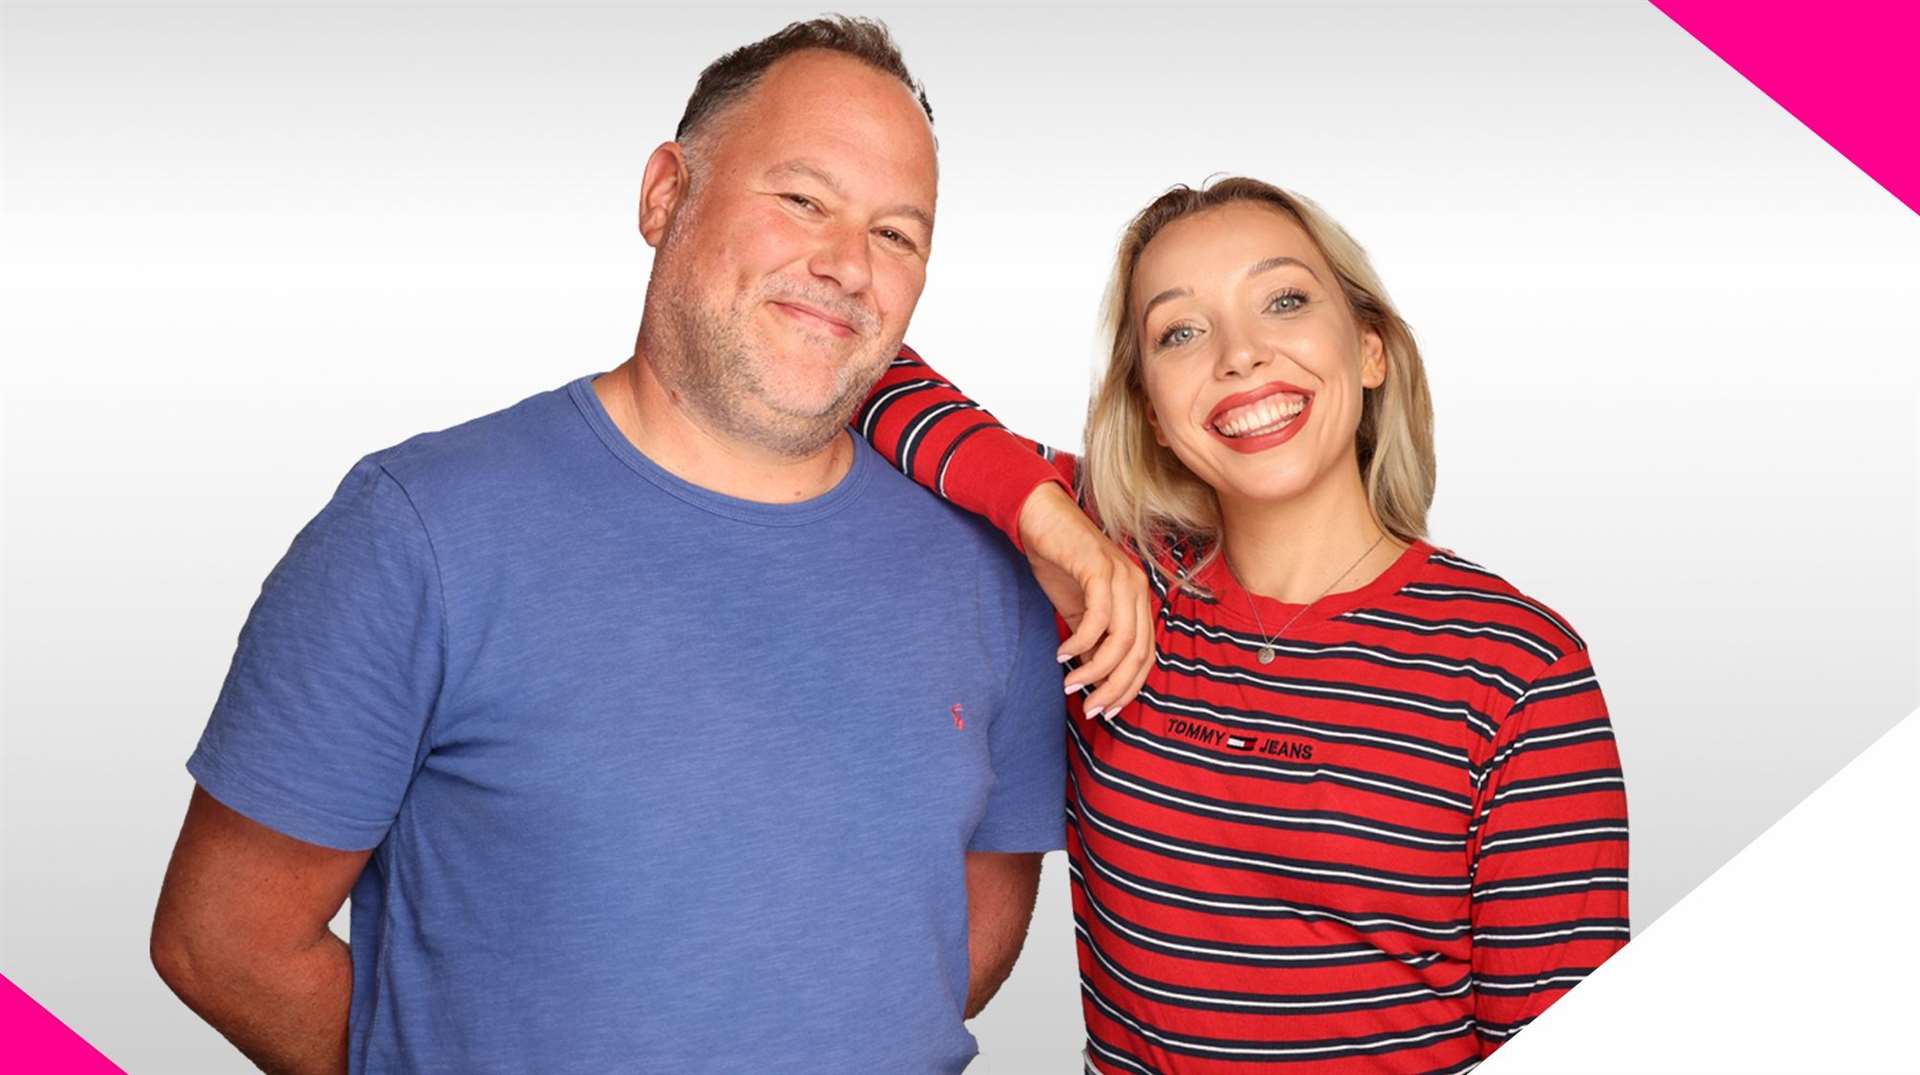 kmfm presenters Garry and Chelsea will be counting down to the switch-on with music, games and giveaways